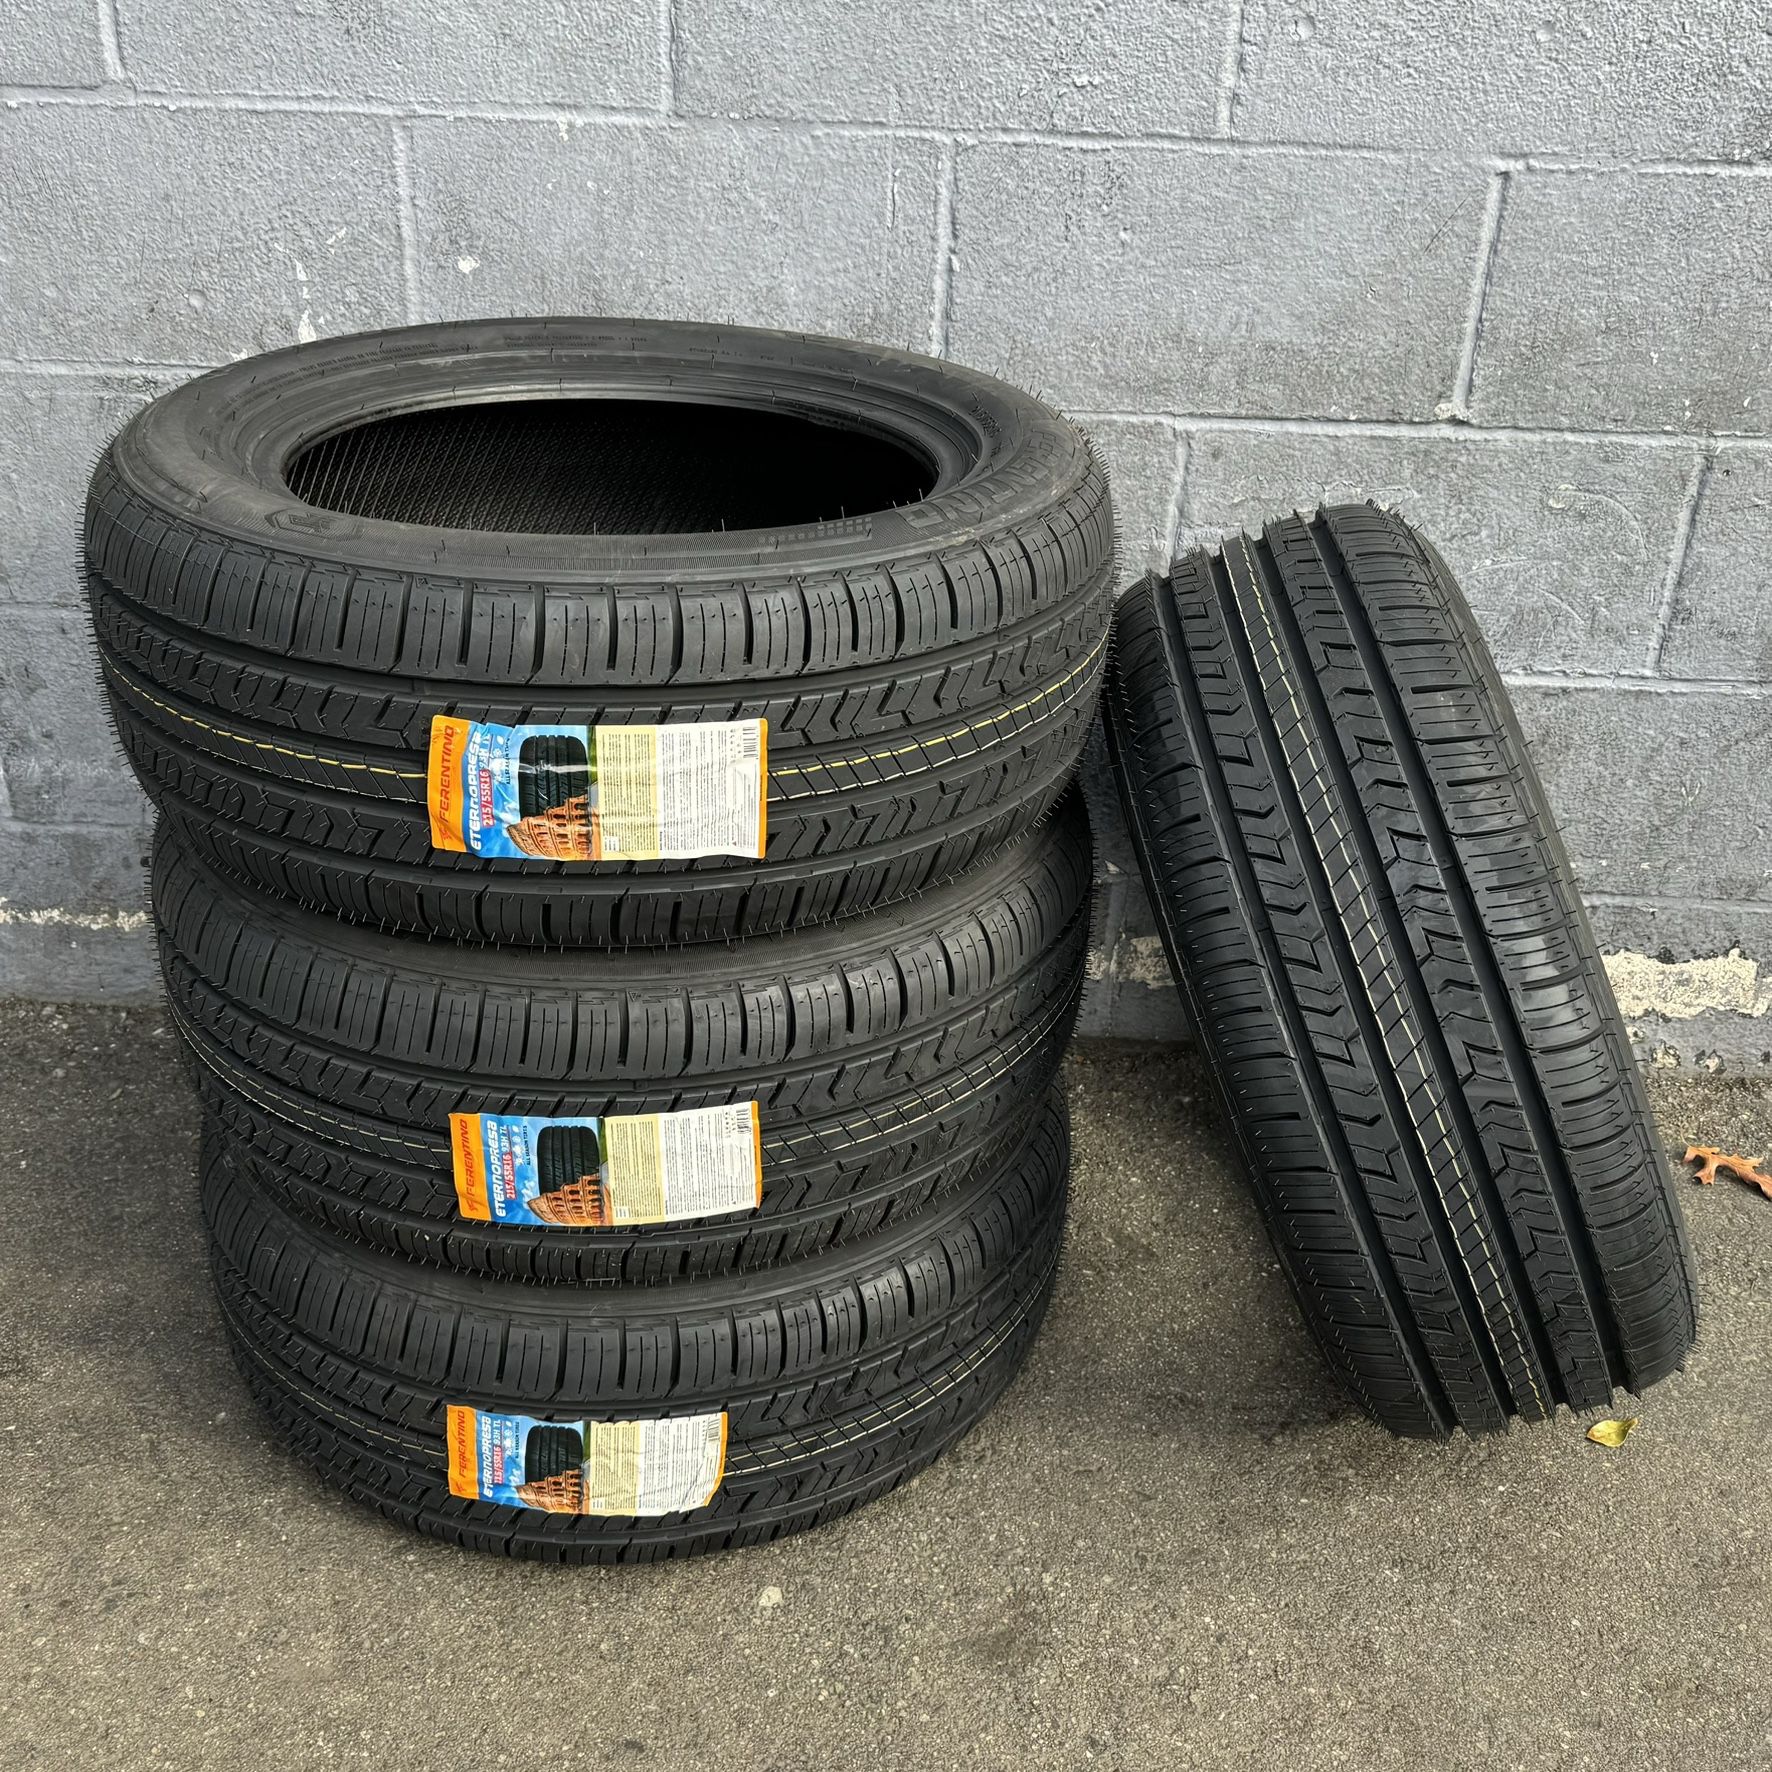 215-55-17 Tires 319$ Including Mounting Balance Limited Time Offer